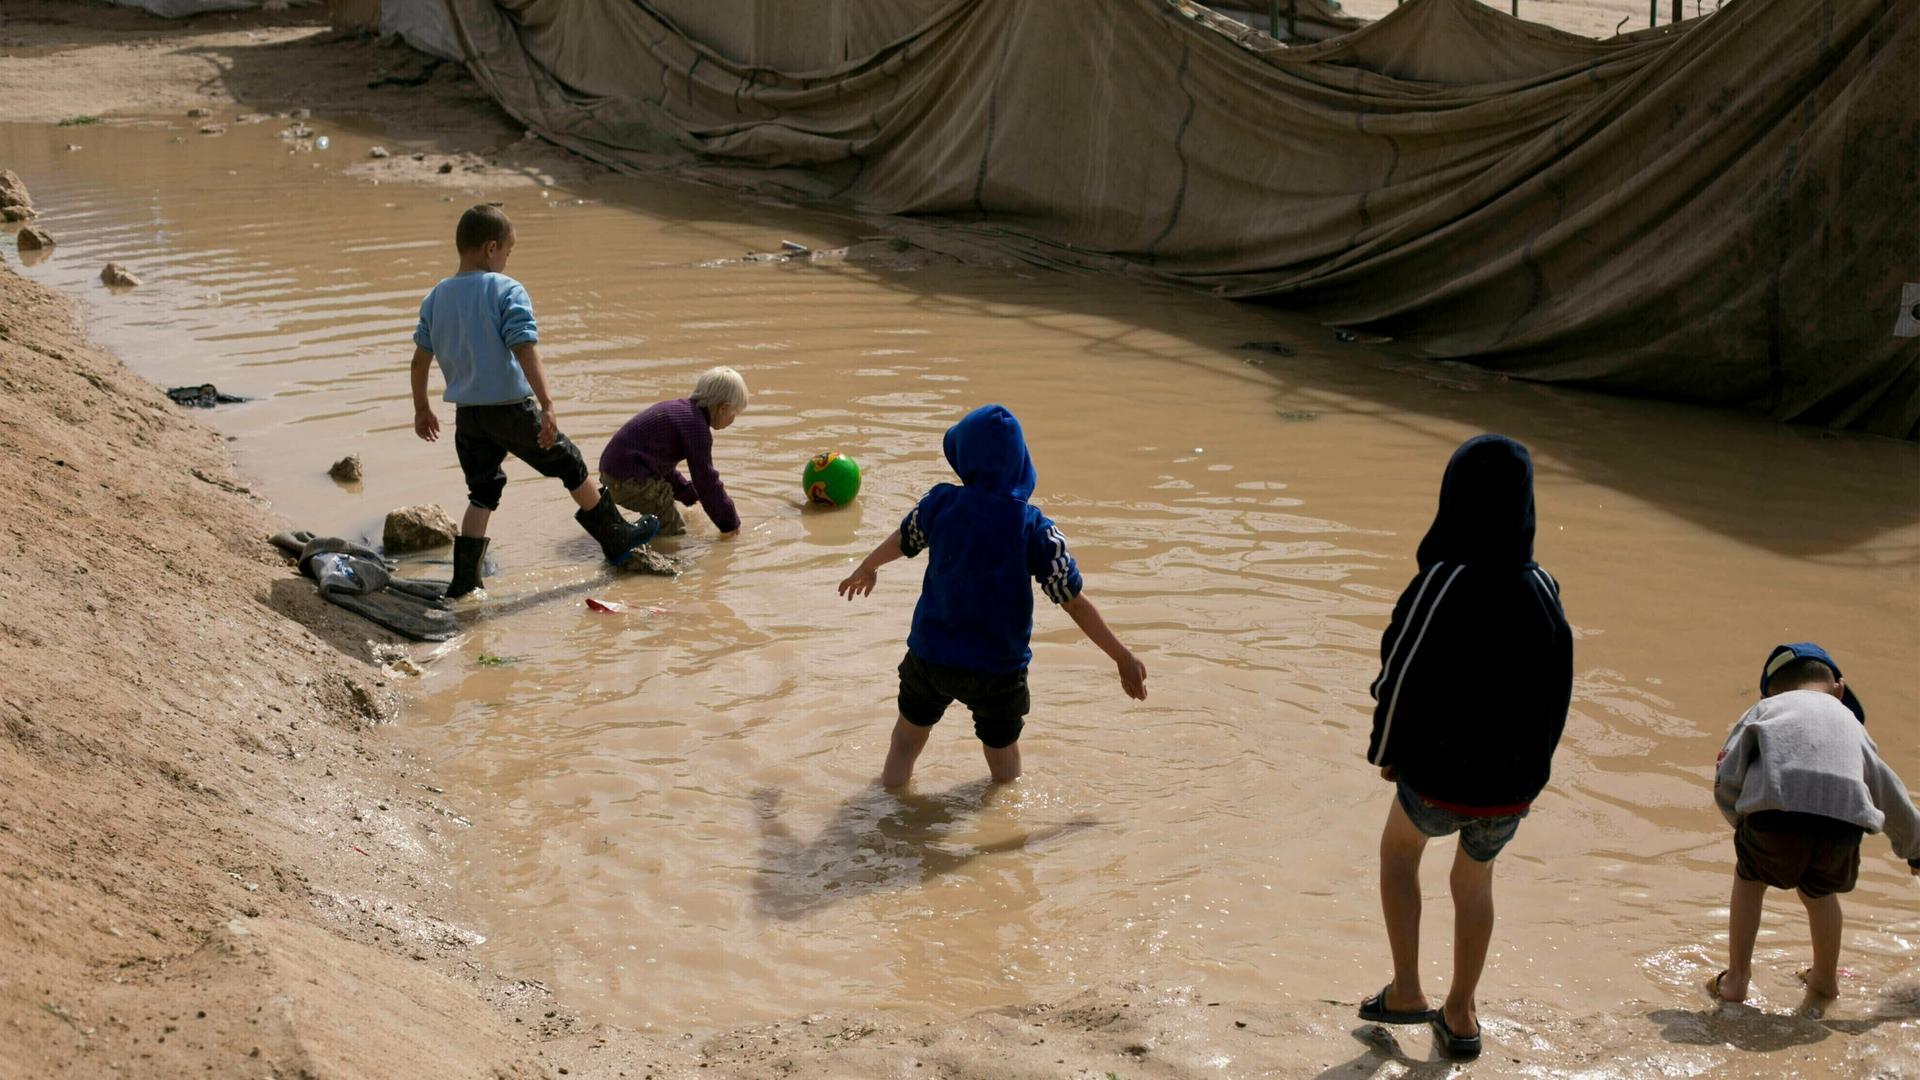 Children play in a mud puddle in the section for foreign families at Al-Hol camp in Hasakeh province, Syria on March 31, 2019.